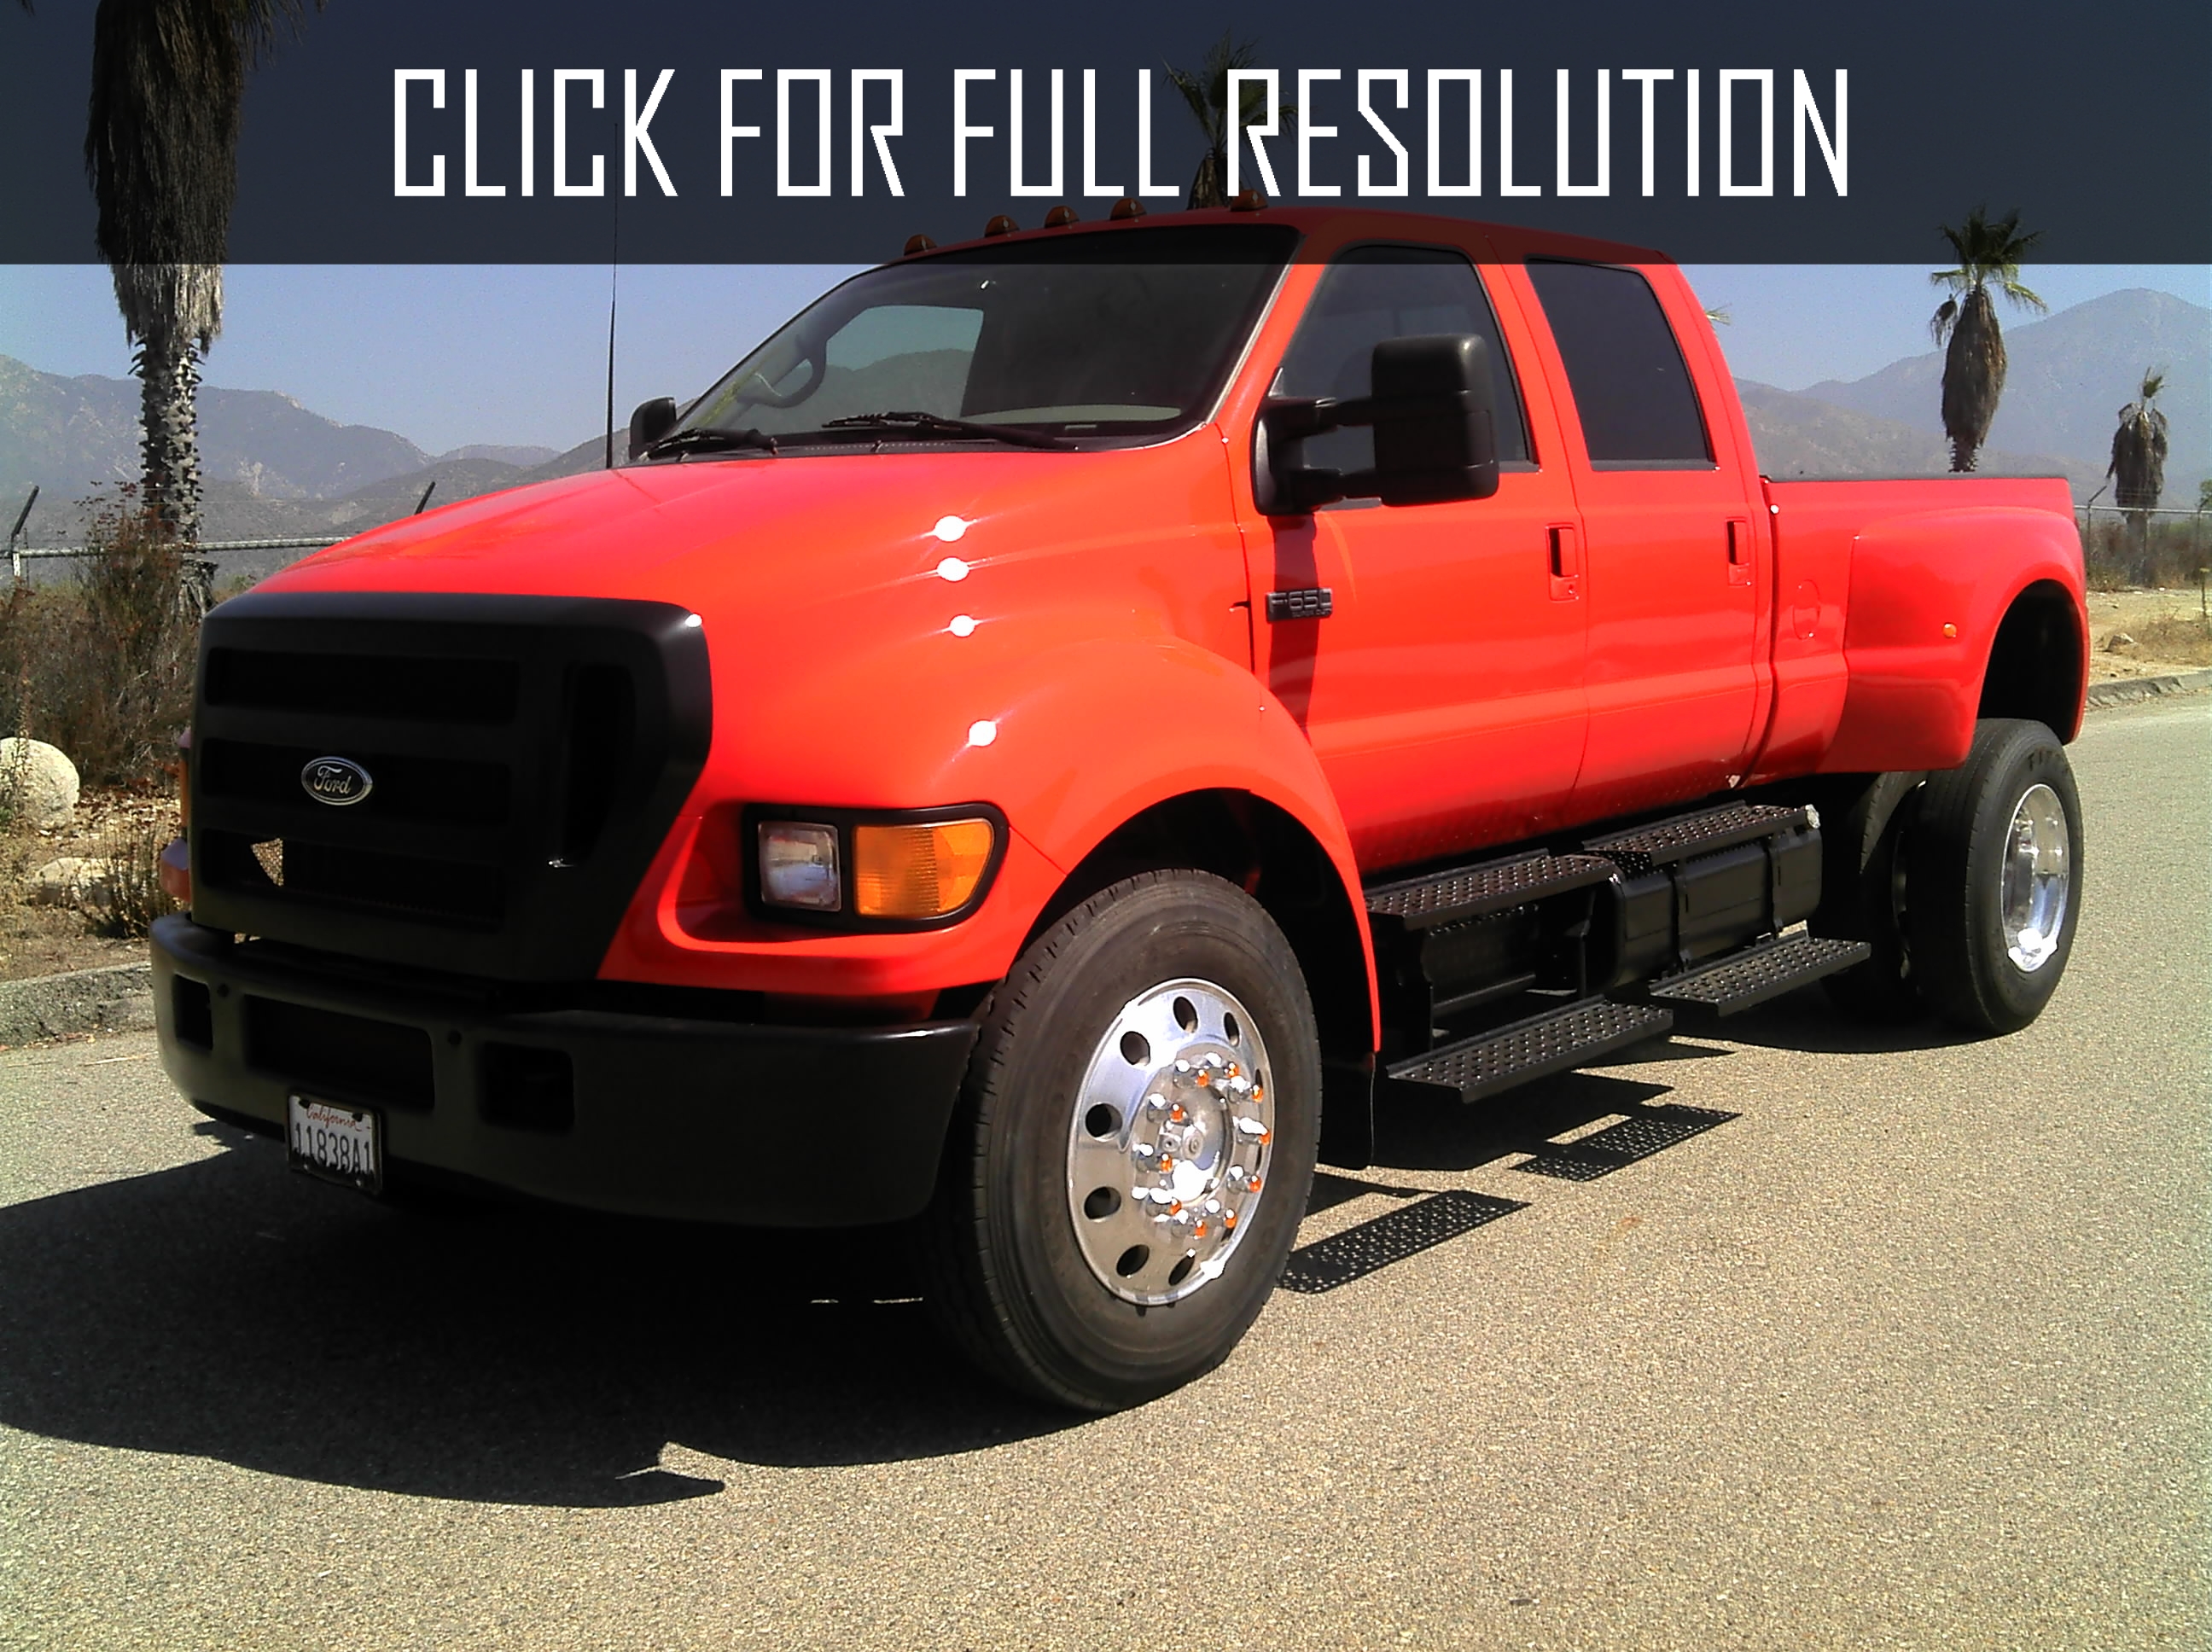 2004 Ford F650 News Reviews Msrp Ratings With Amazing Images